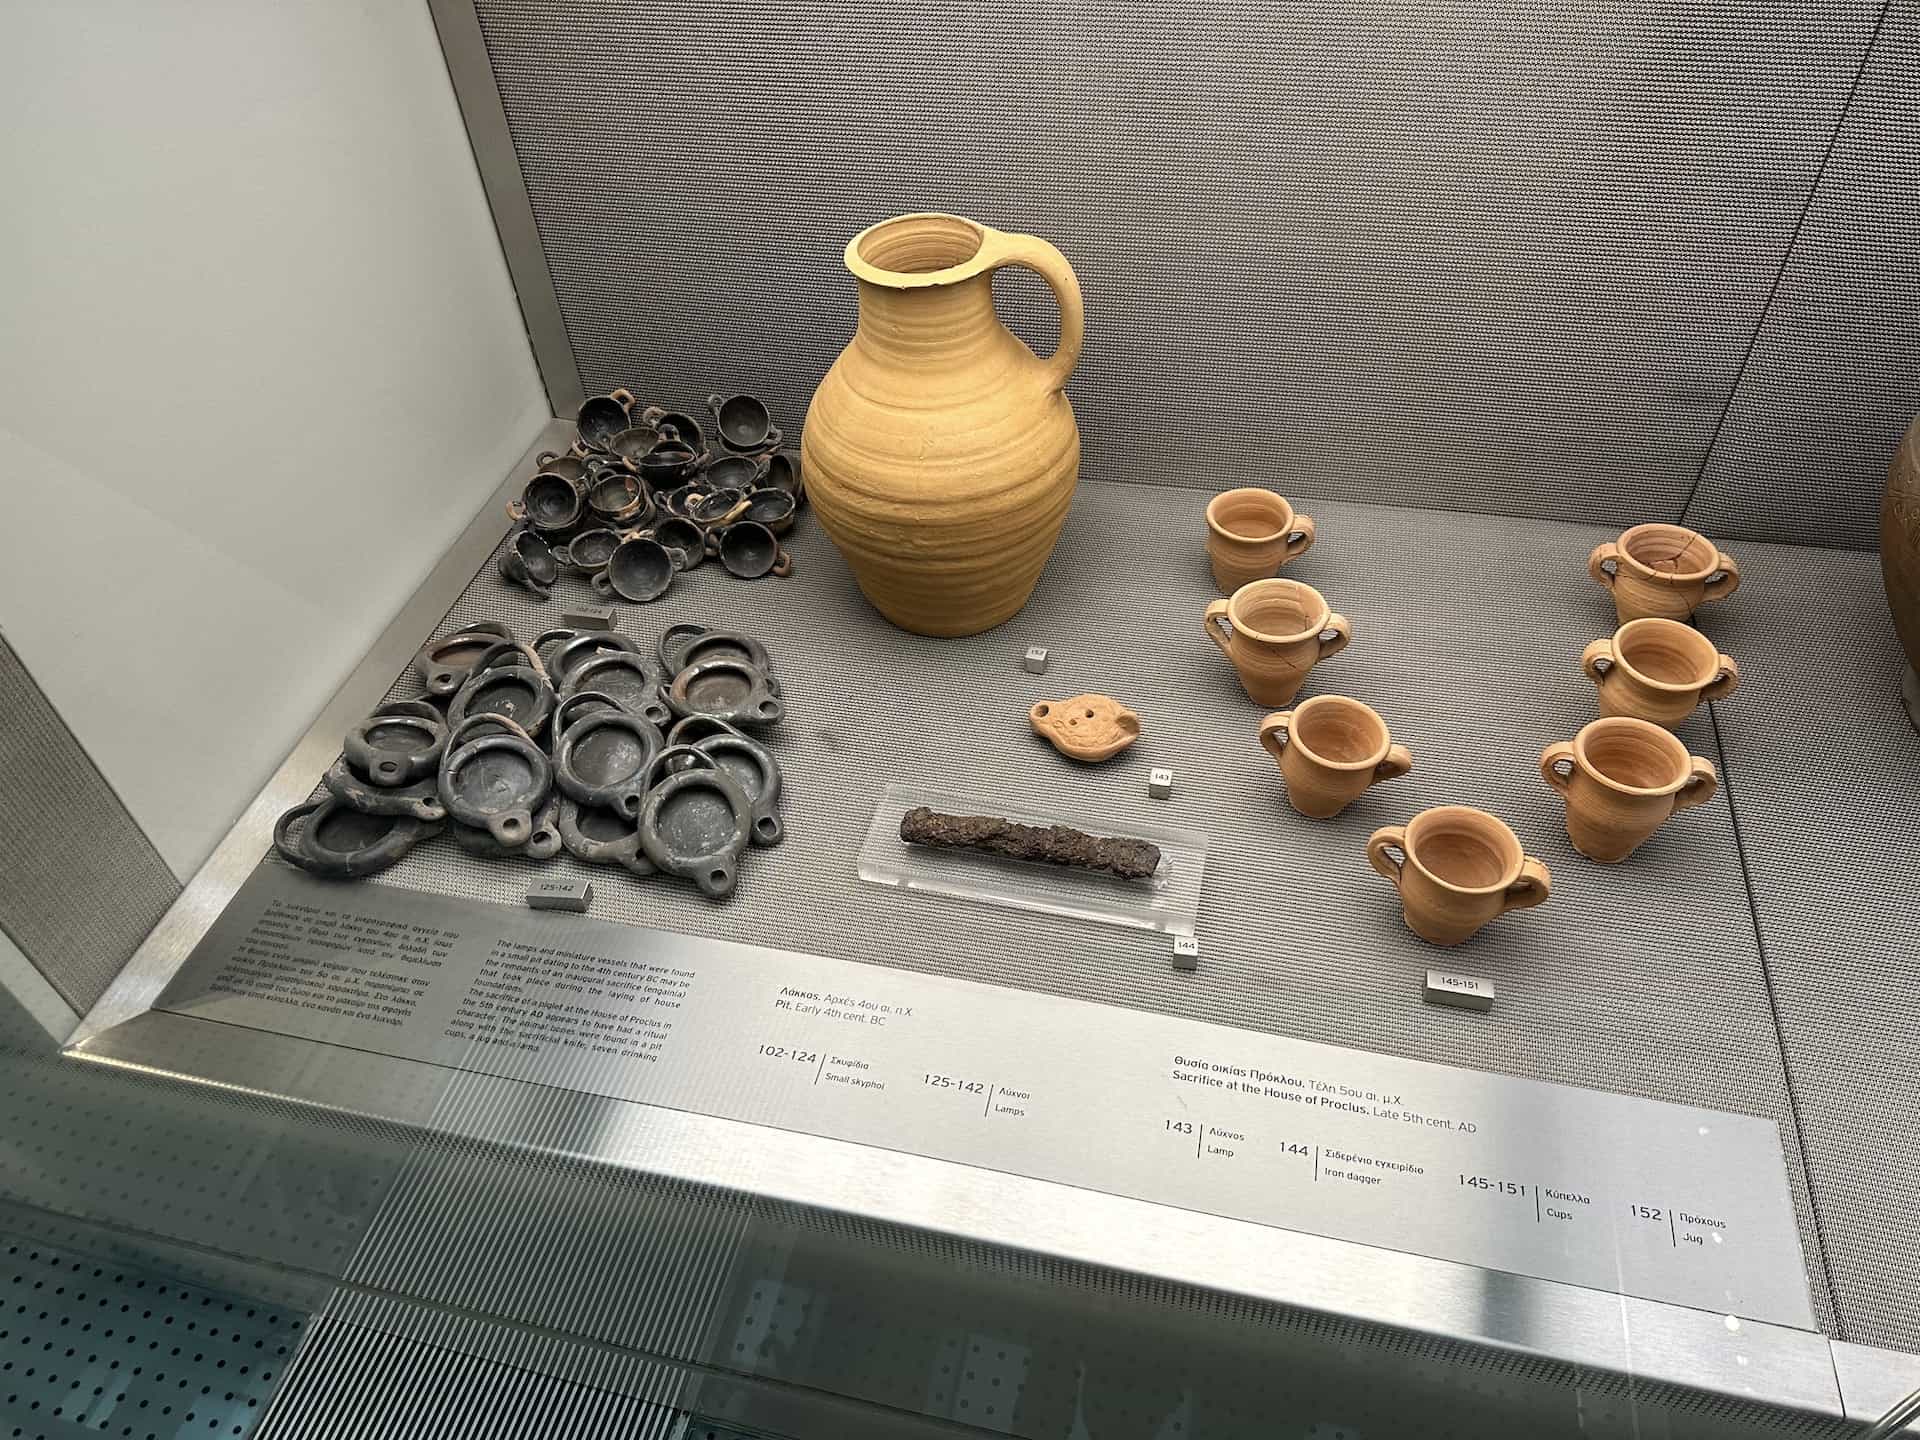 Items from the sacrifice at the House of Proclus; late 5th century at the Acropolis Museum in Athens, Greece